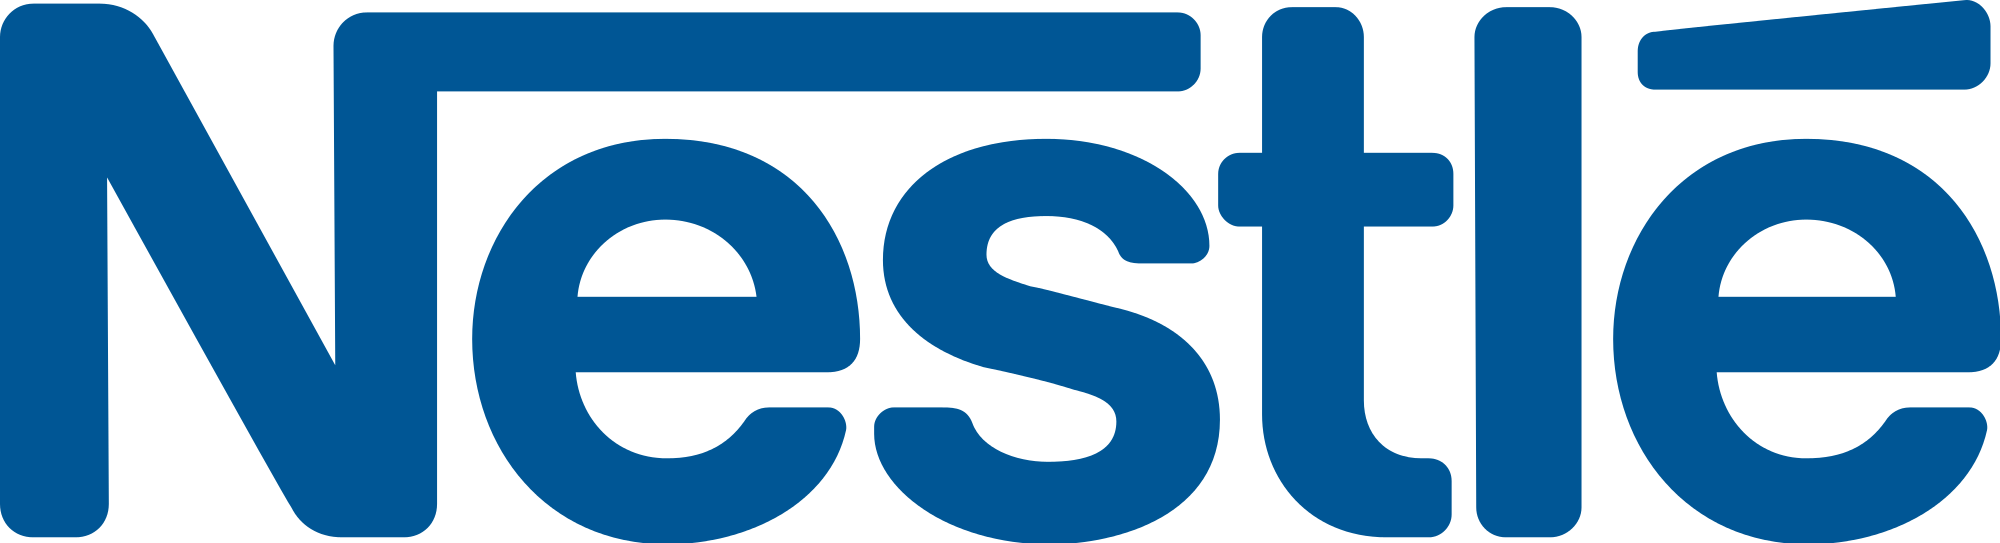 nestle png.png